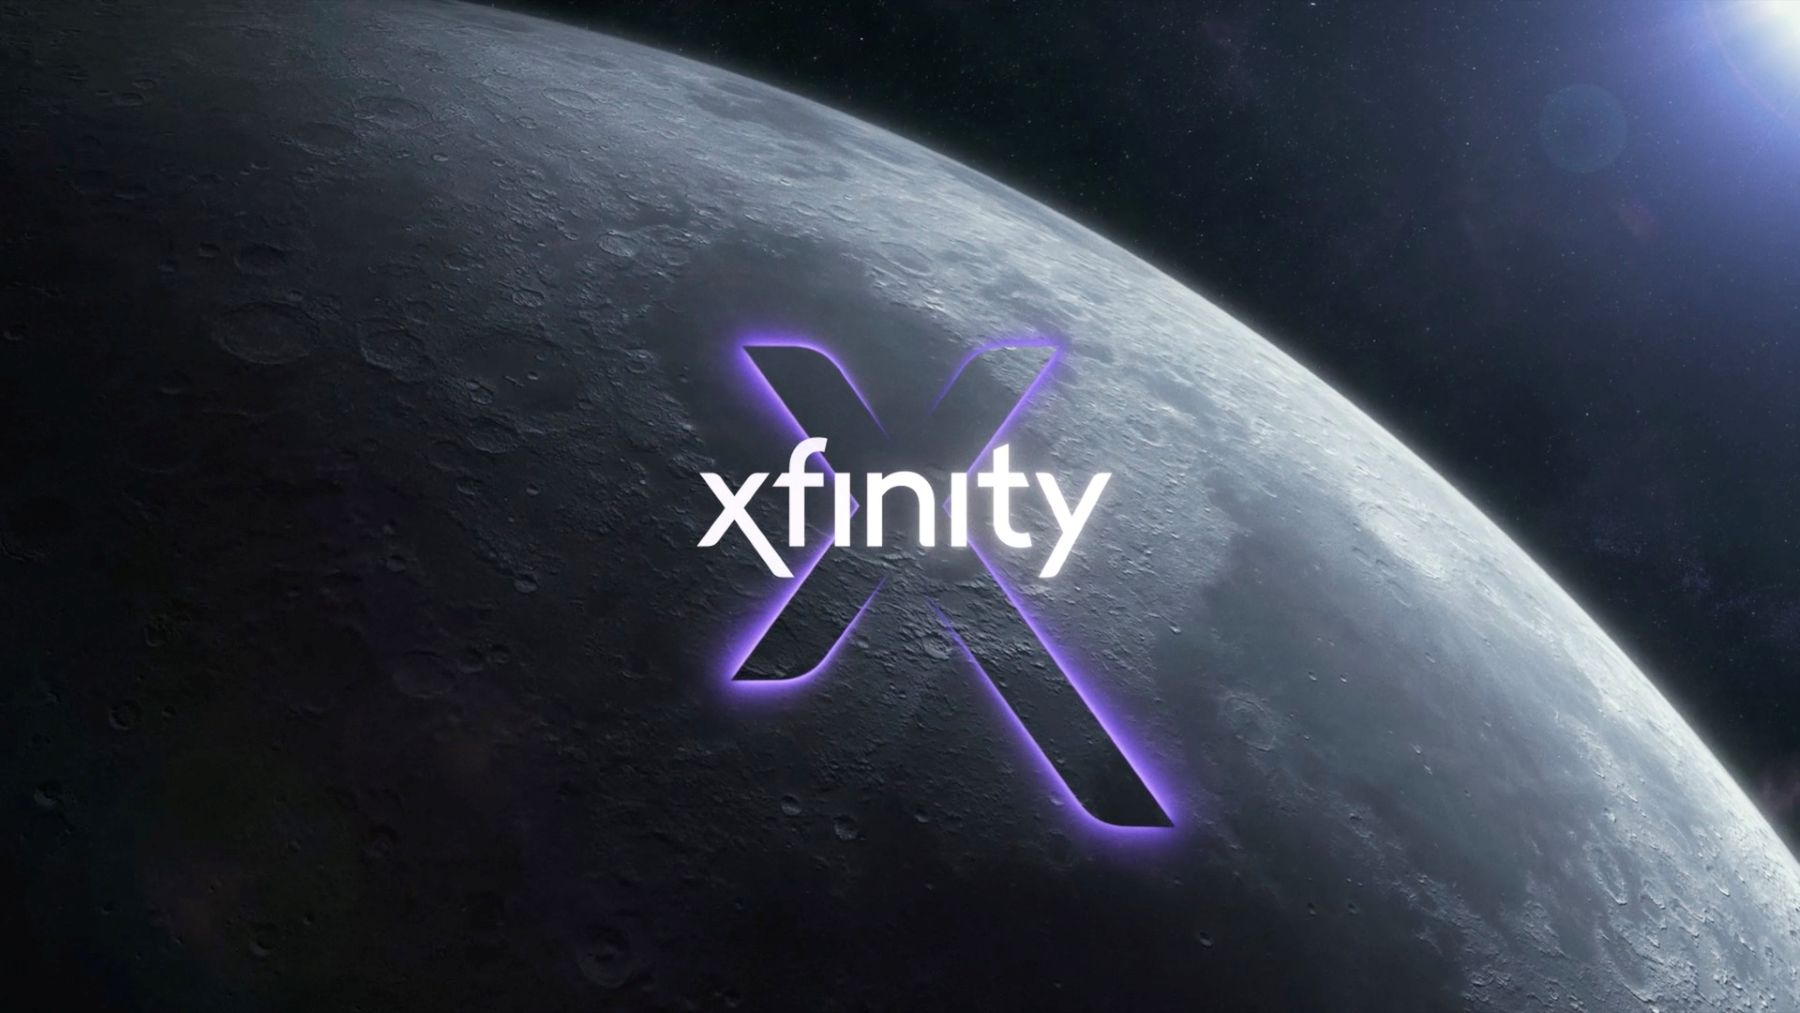 Prepare for the New School Year With Fast, Reliable and Affordable Internet from Xfinity Starting at Only $25